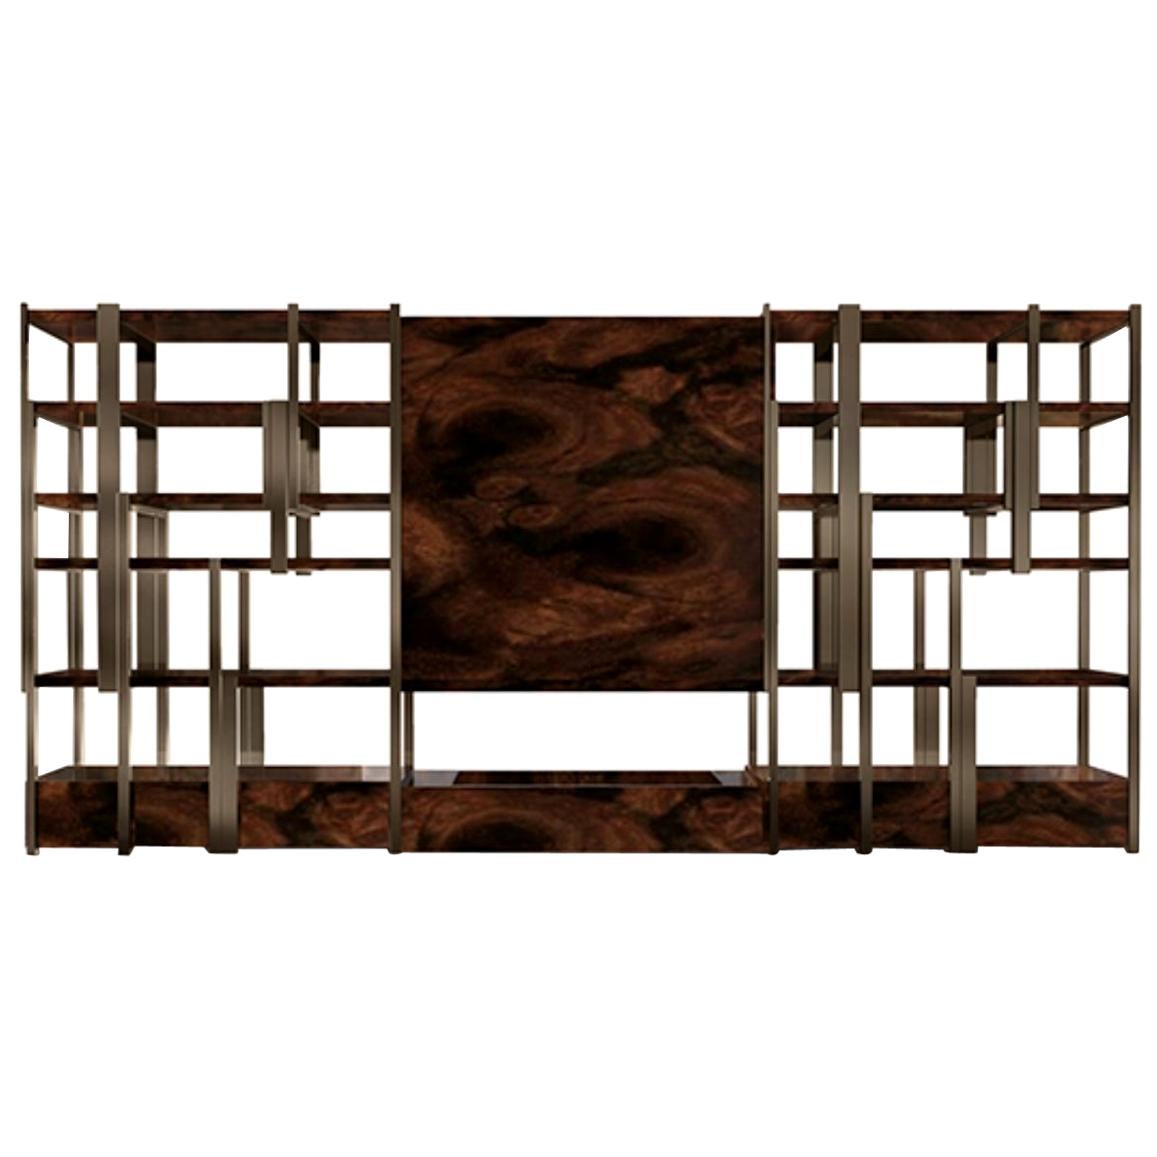 Contemporary Modern Caffeine Walnut Root Veneer Bookcase by Caffe Latte For Sale